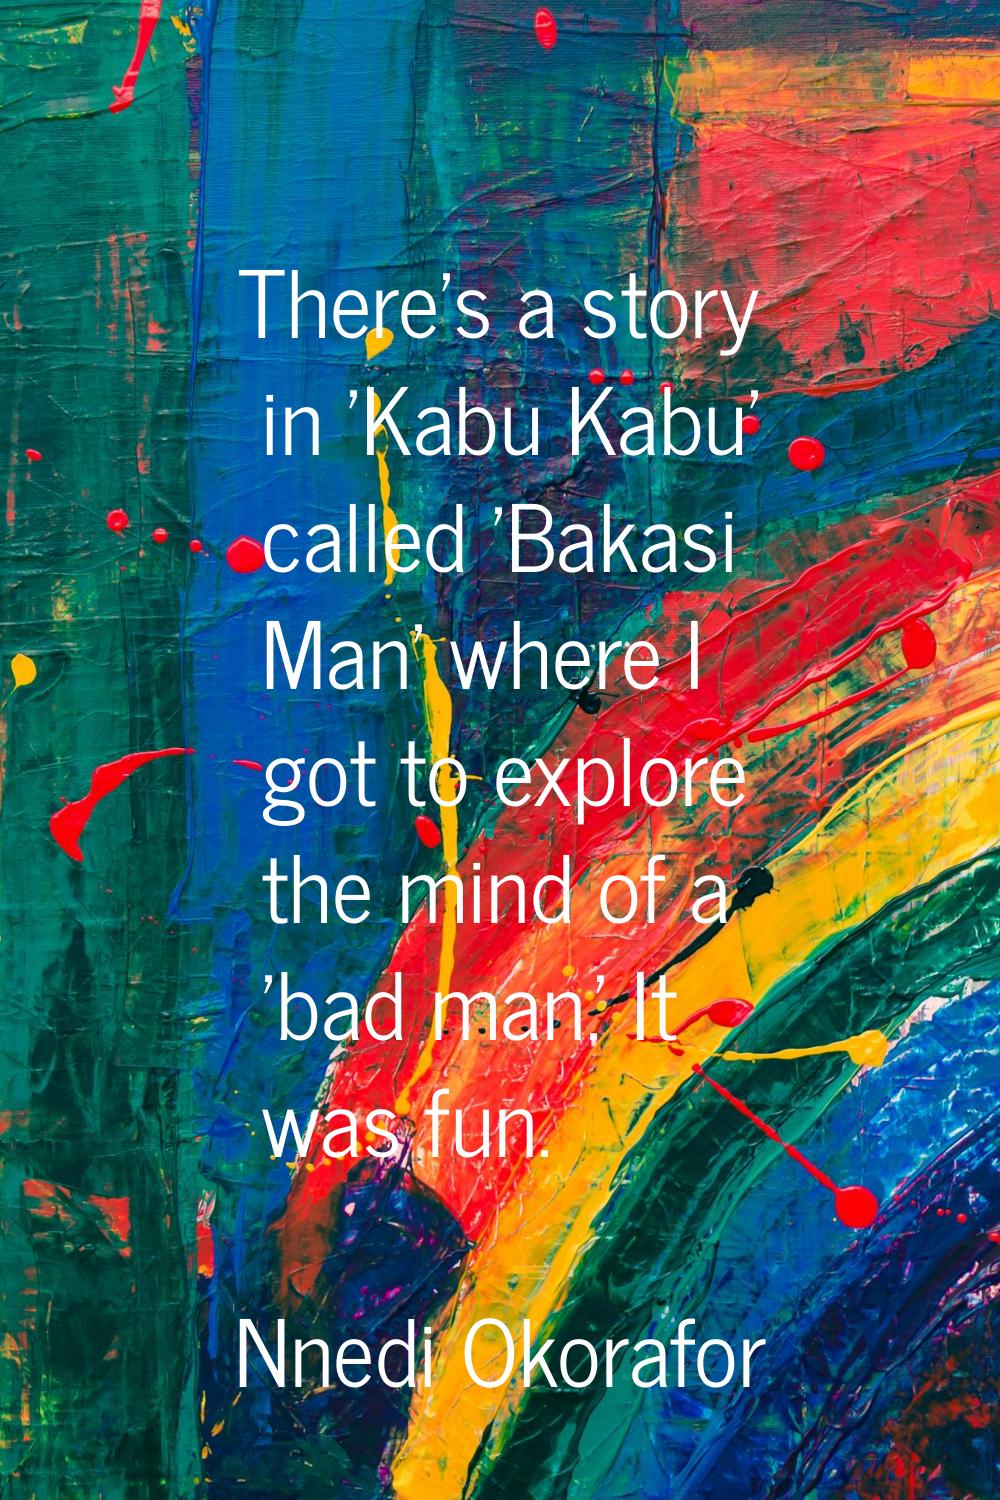 There's a story in 'Kabu Kabu' called 'Bakasi Man' where I got to explore the mind of a 'bad man.' 